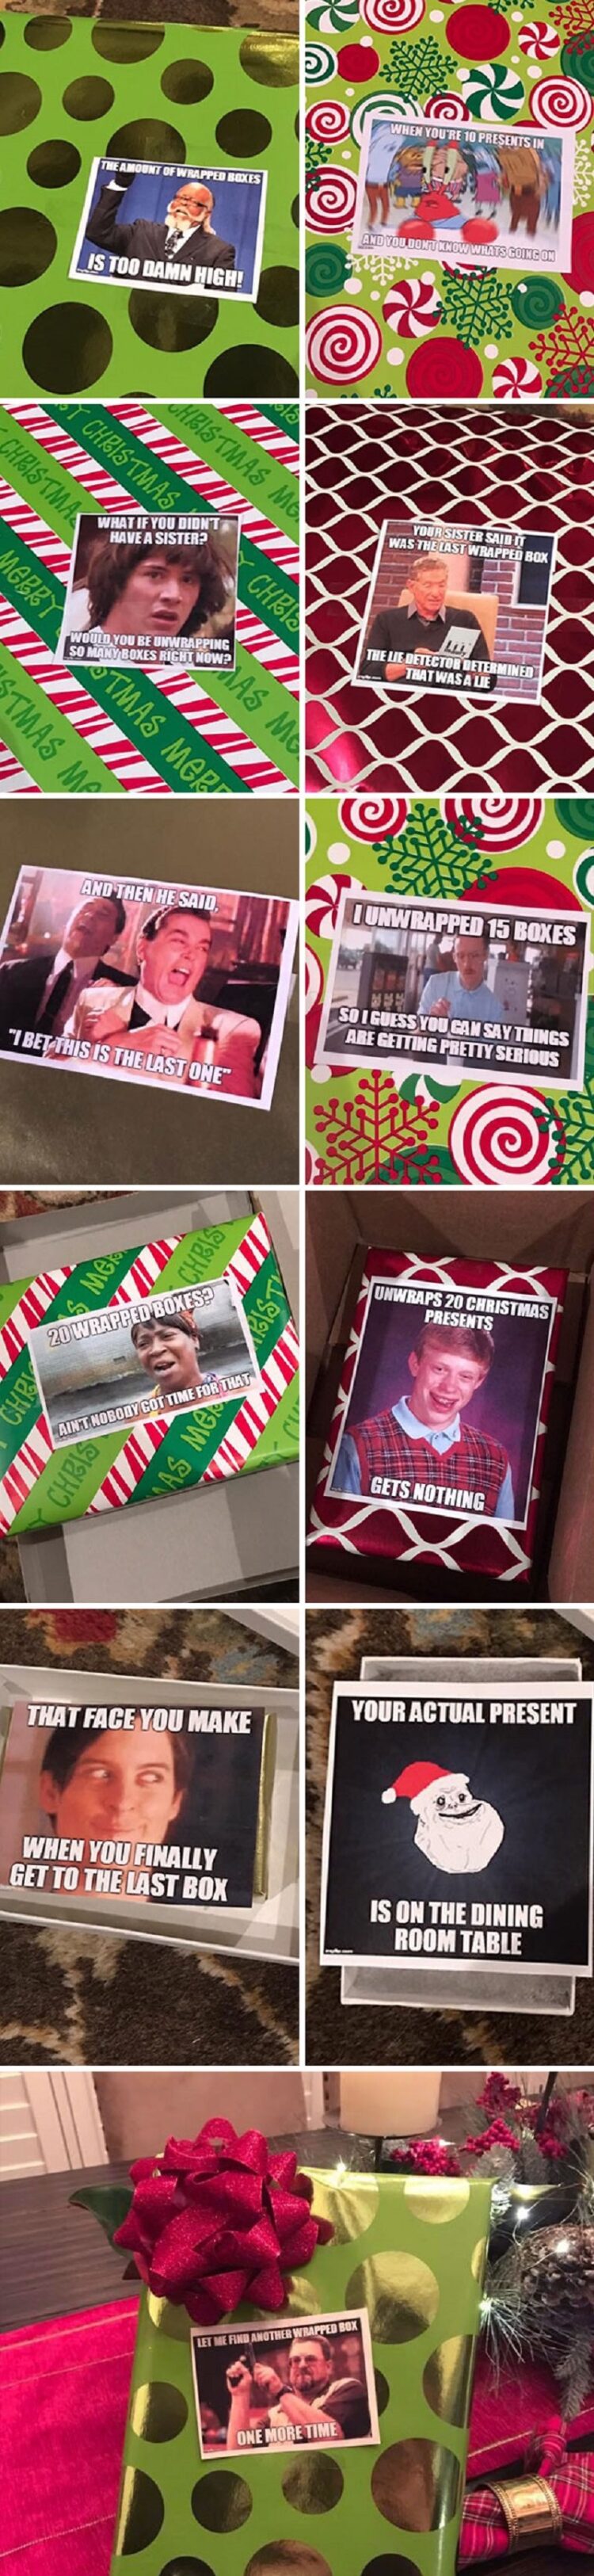 My Friend's Sister Had Some Fun With His Gift Wrapping.